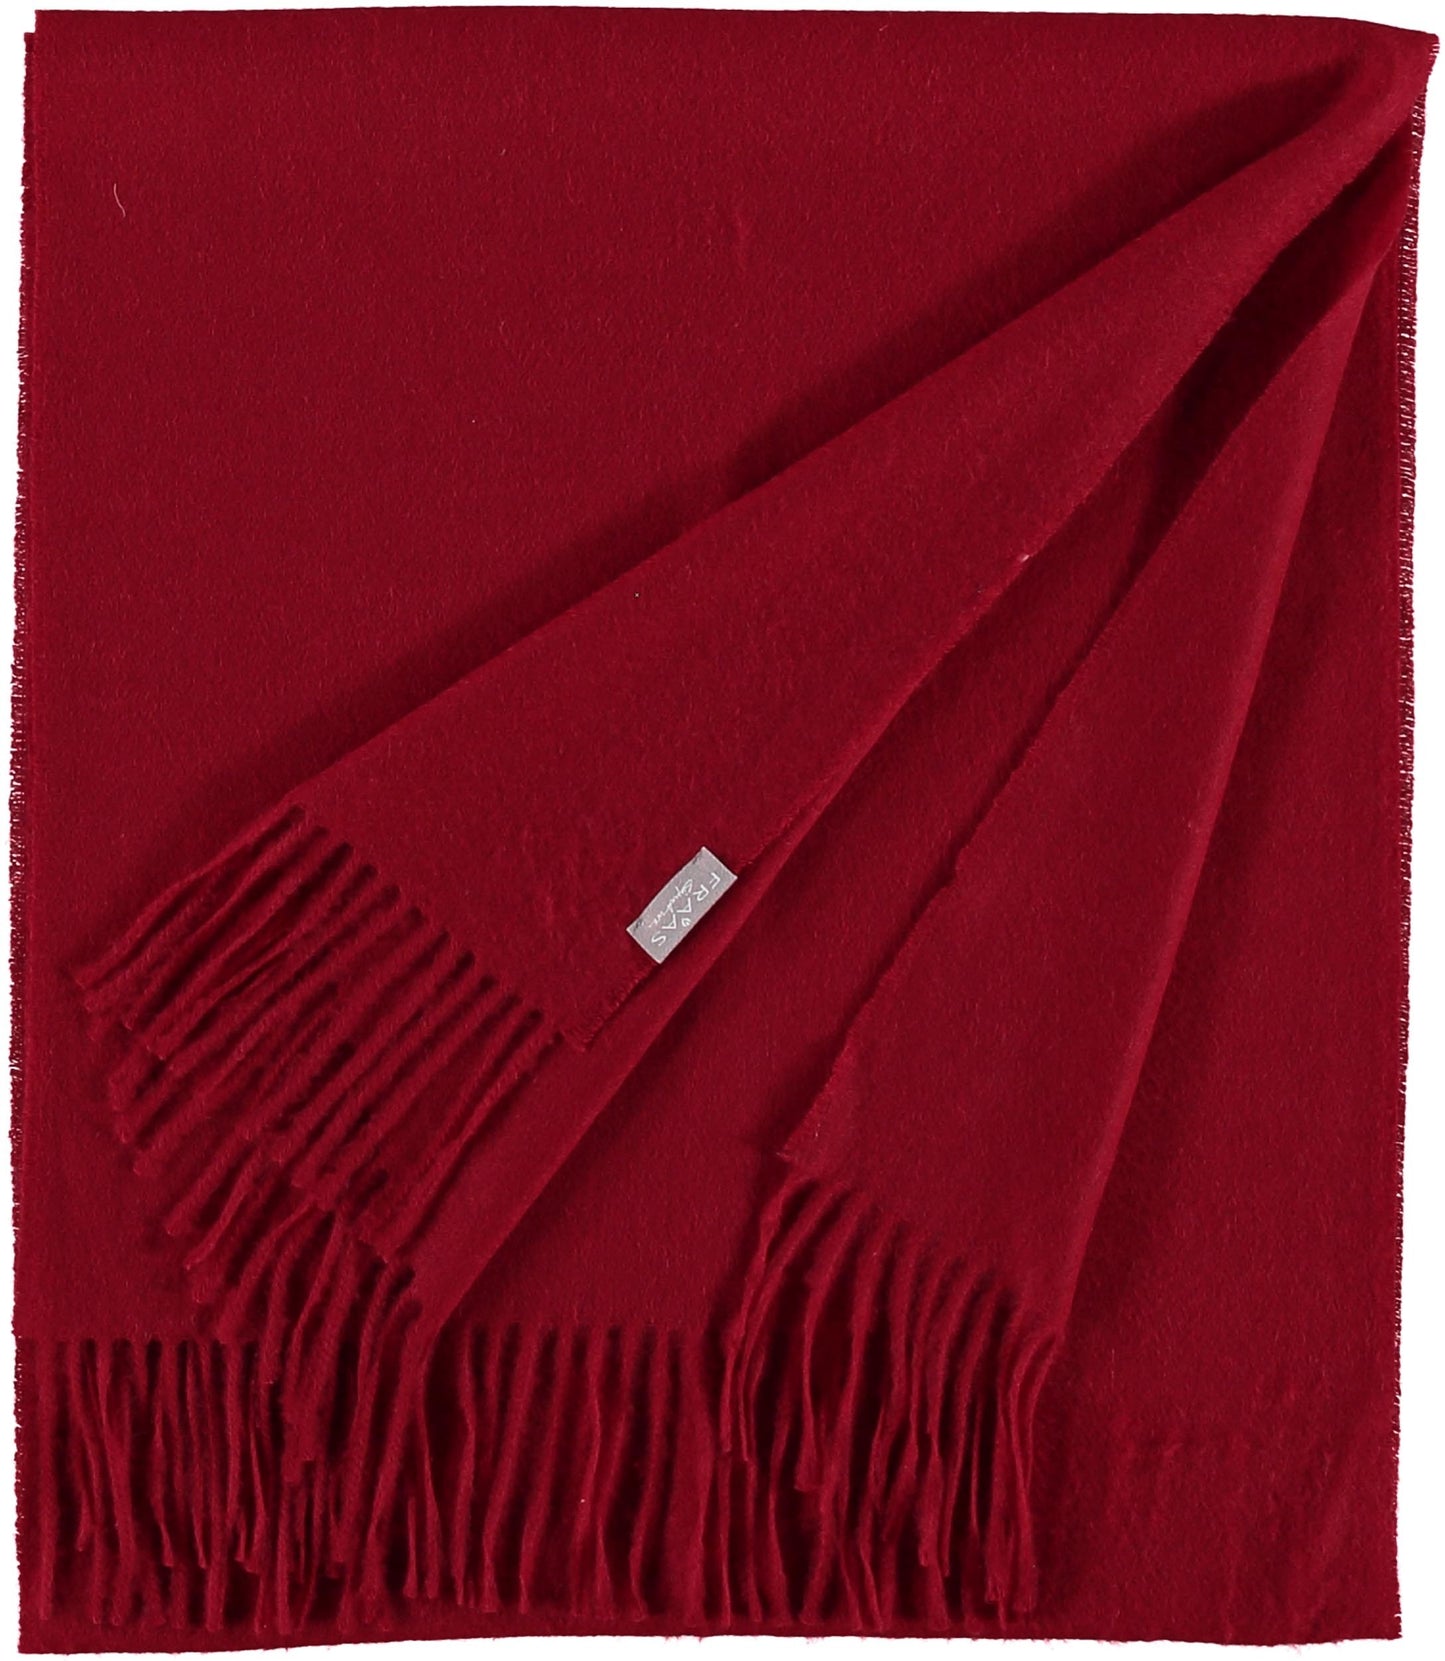 Cashmere woven scarf in red by Fraas